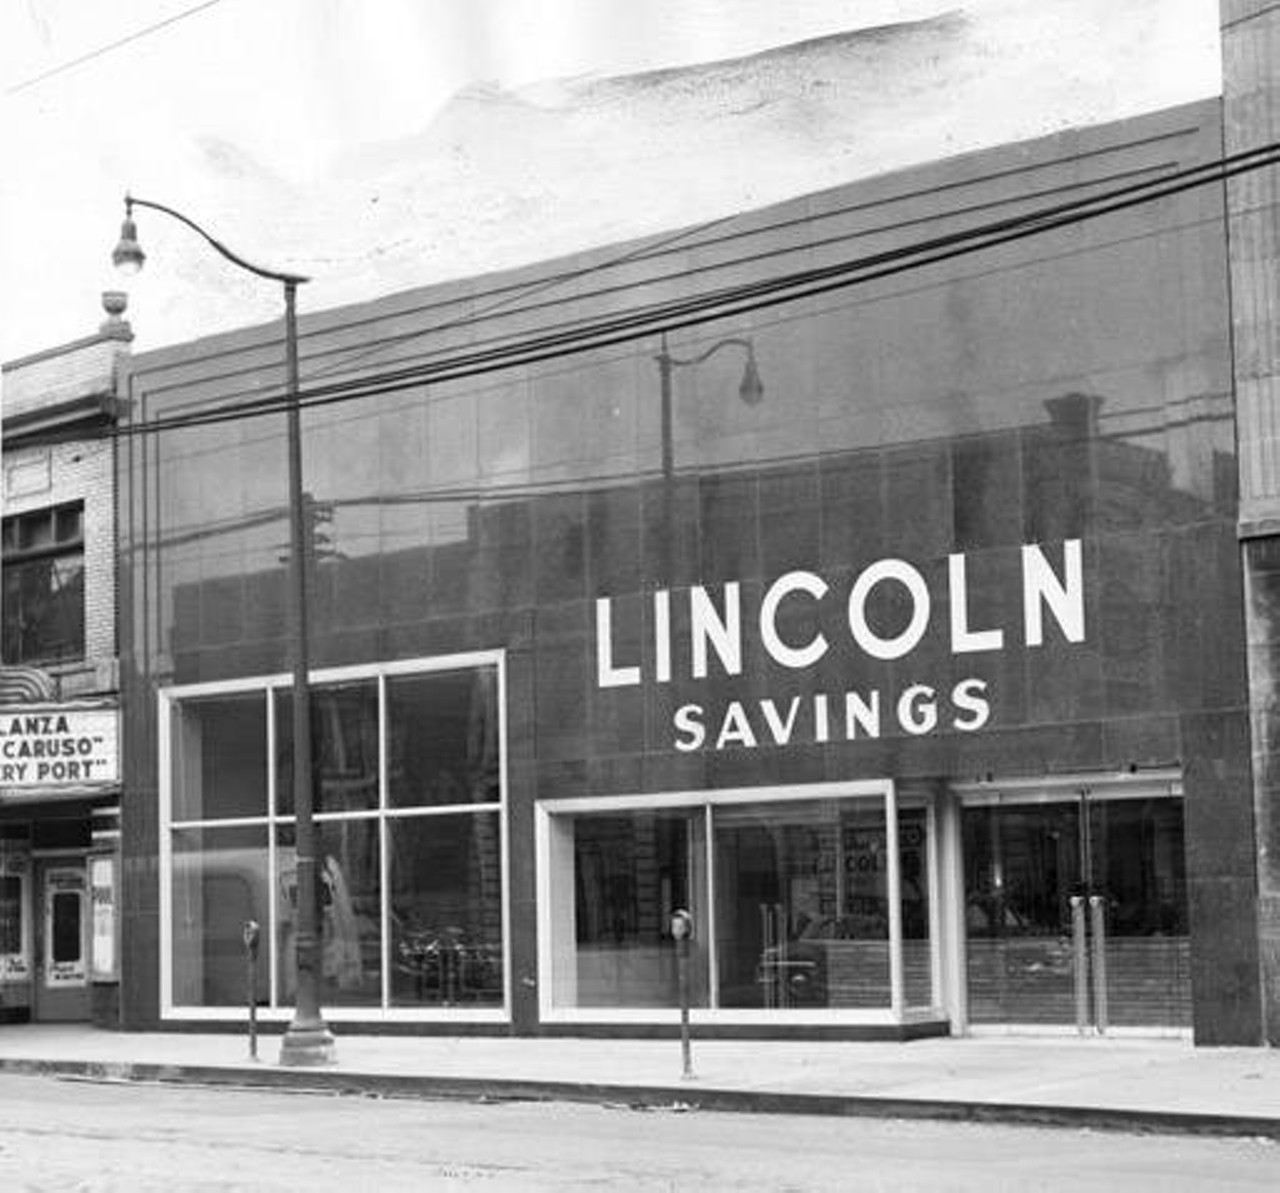 Lincoln Savings and Loan on West 25th, 1952.